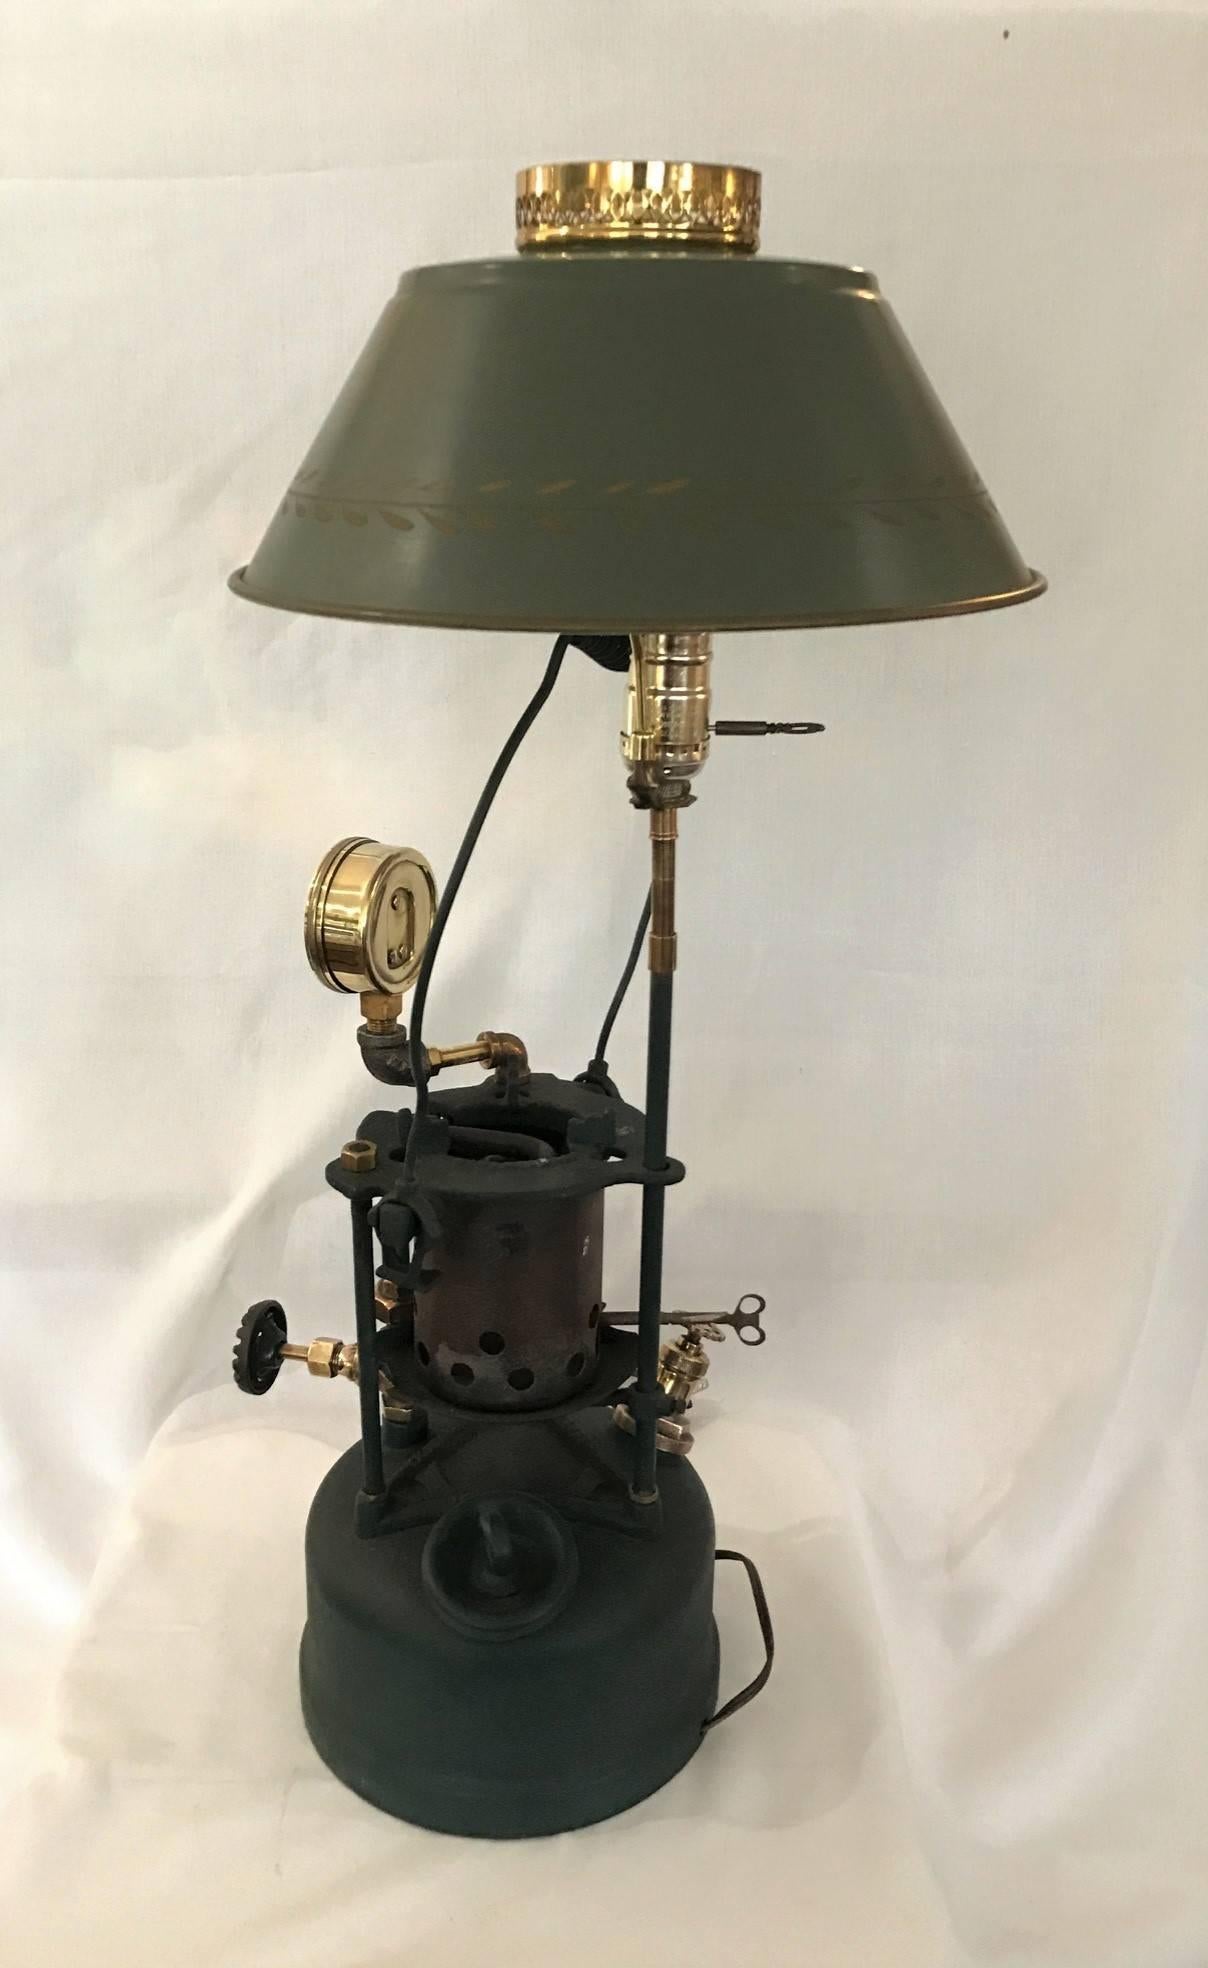 On Sale Now!  Man Cave!  Perfect Gift For That Special Man in Your Life!!  Early 1900's lead Melter lamp. Polished brass oxygen gauge antique metal. This is an original 1900's piece that is converted into a modern day lamp. Conversion by Local a